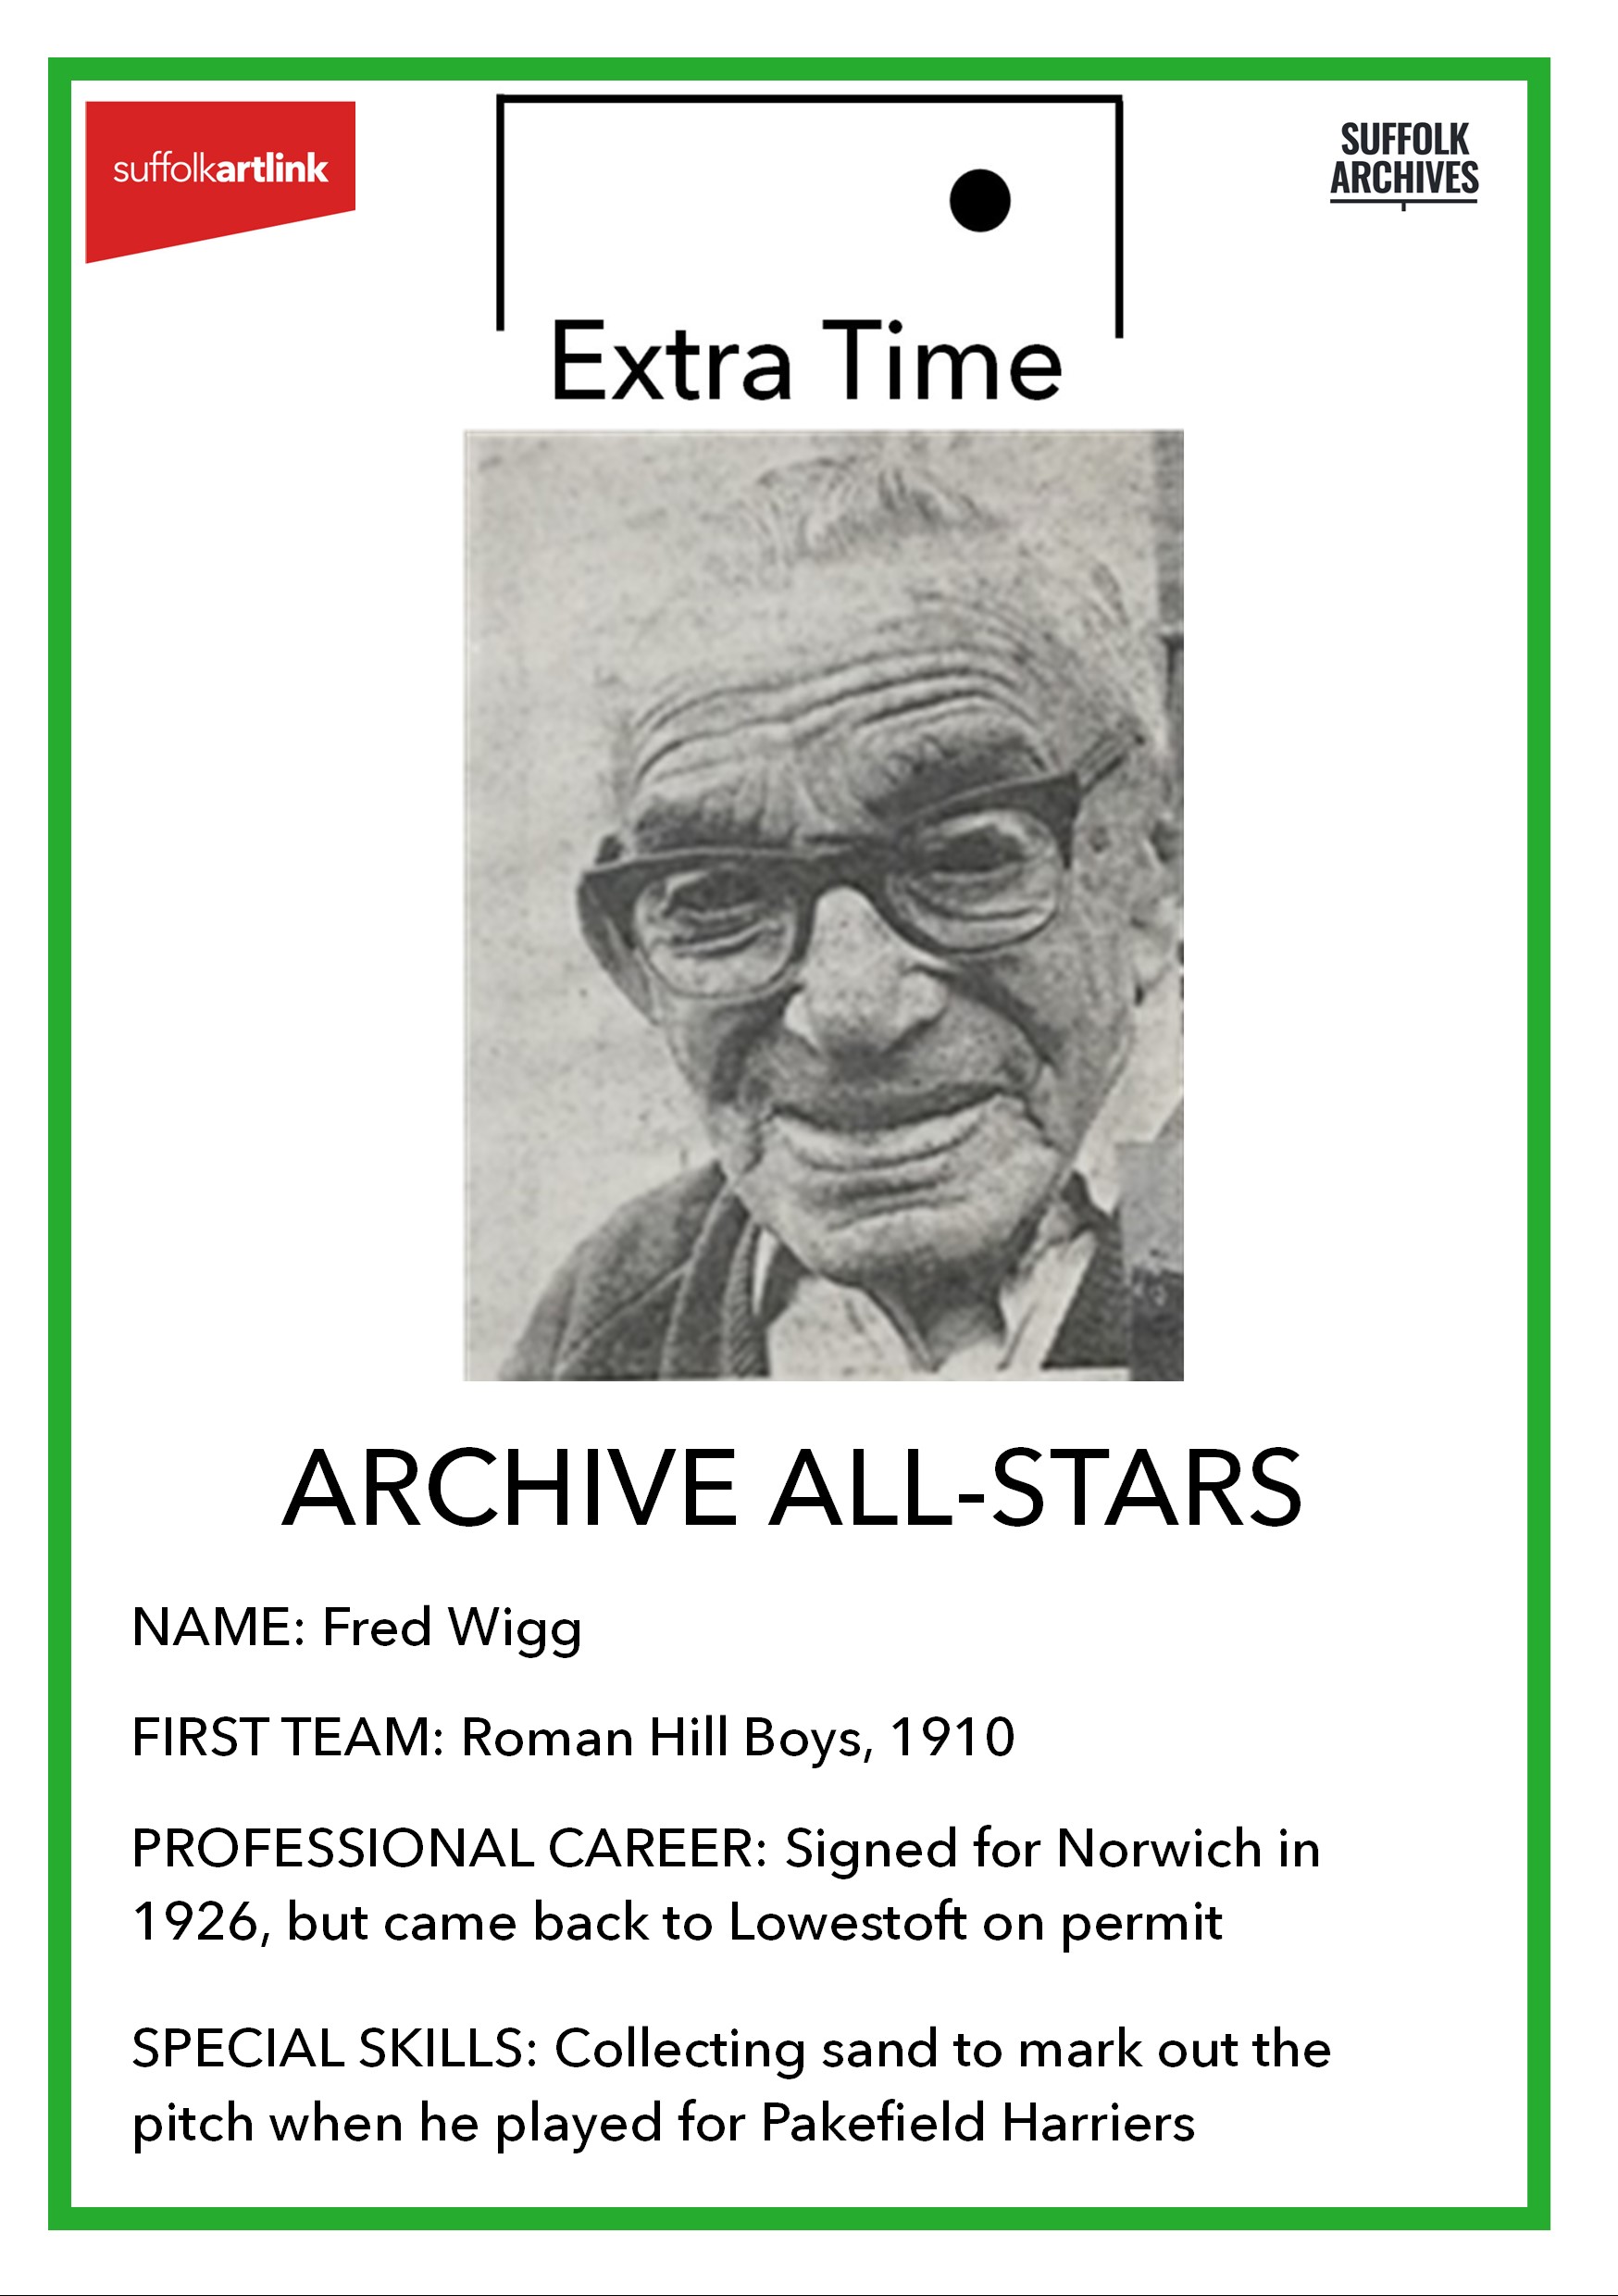 Image of gentleman's face and text Extra Time Archive All-Stars Name Fred Wigg, first team Roman Hill Boys, 1920, Professional career, signed to Norwich in 1926 but came back to Lowestoft on permit, special skills, collecting sand to mark out the pitch when he played for Pakefield Harriers